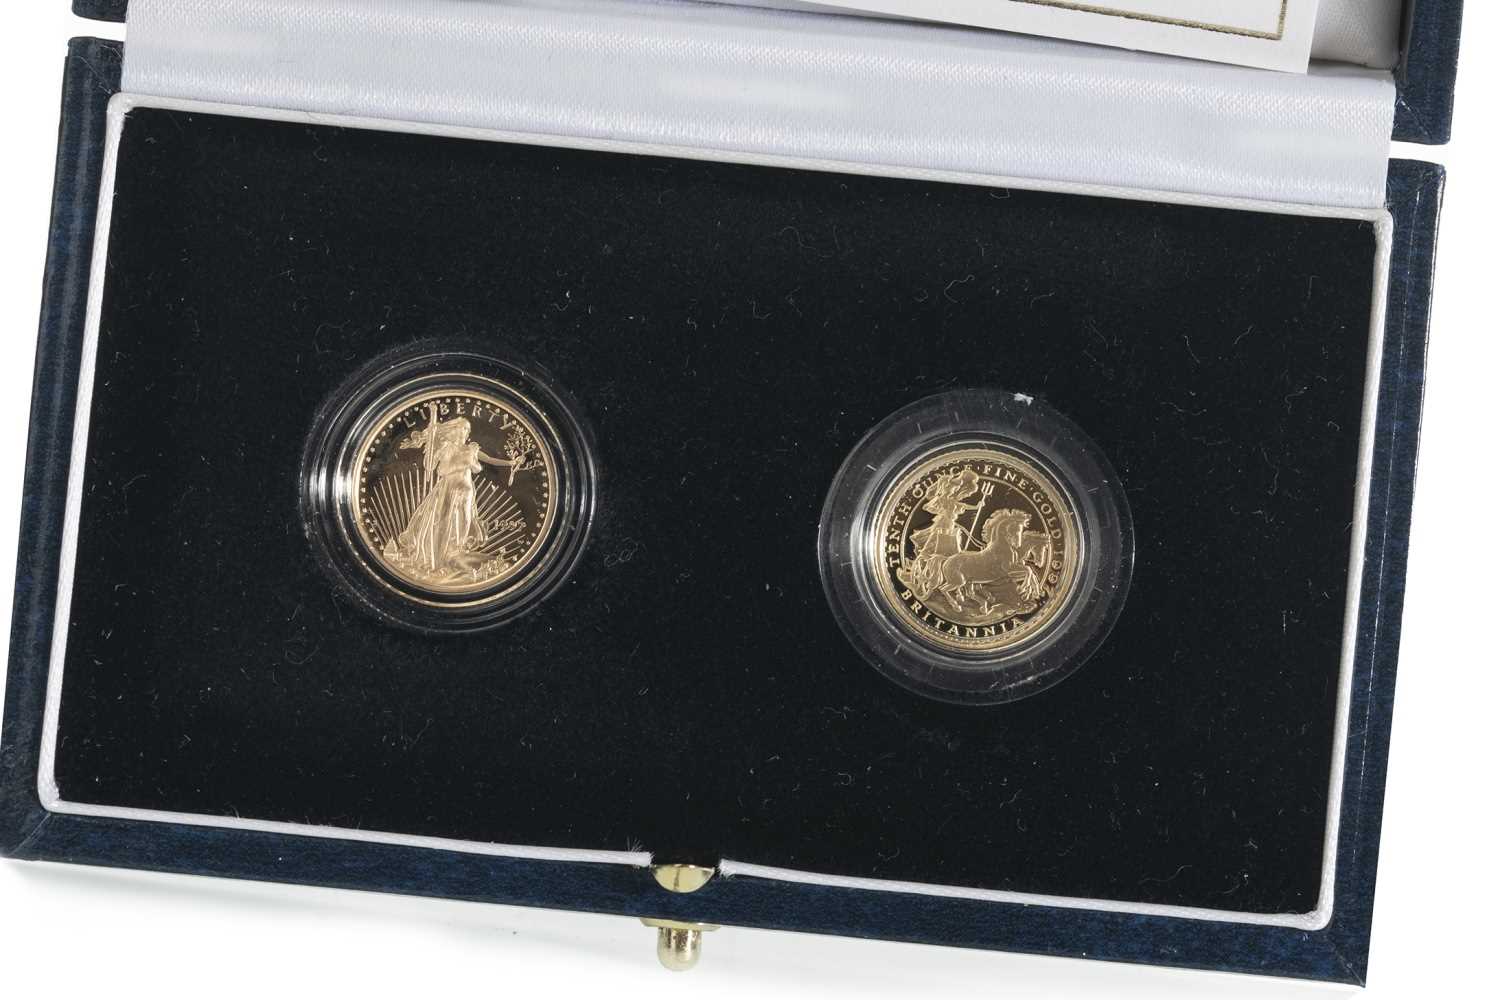 Lot 47 - 1997 GOLD PROOF BRITANNIA £10 COIN AND A LIBERTY $5 LADIES OF FREEDOM TWO COIN SET